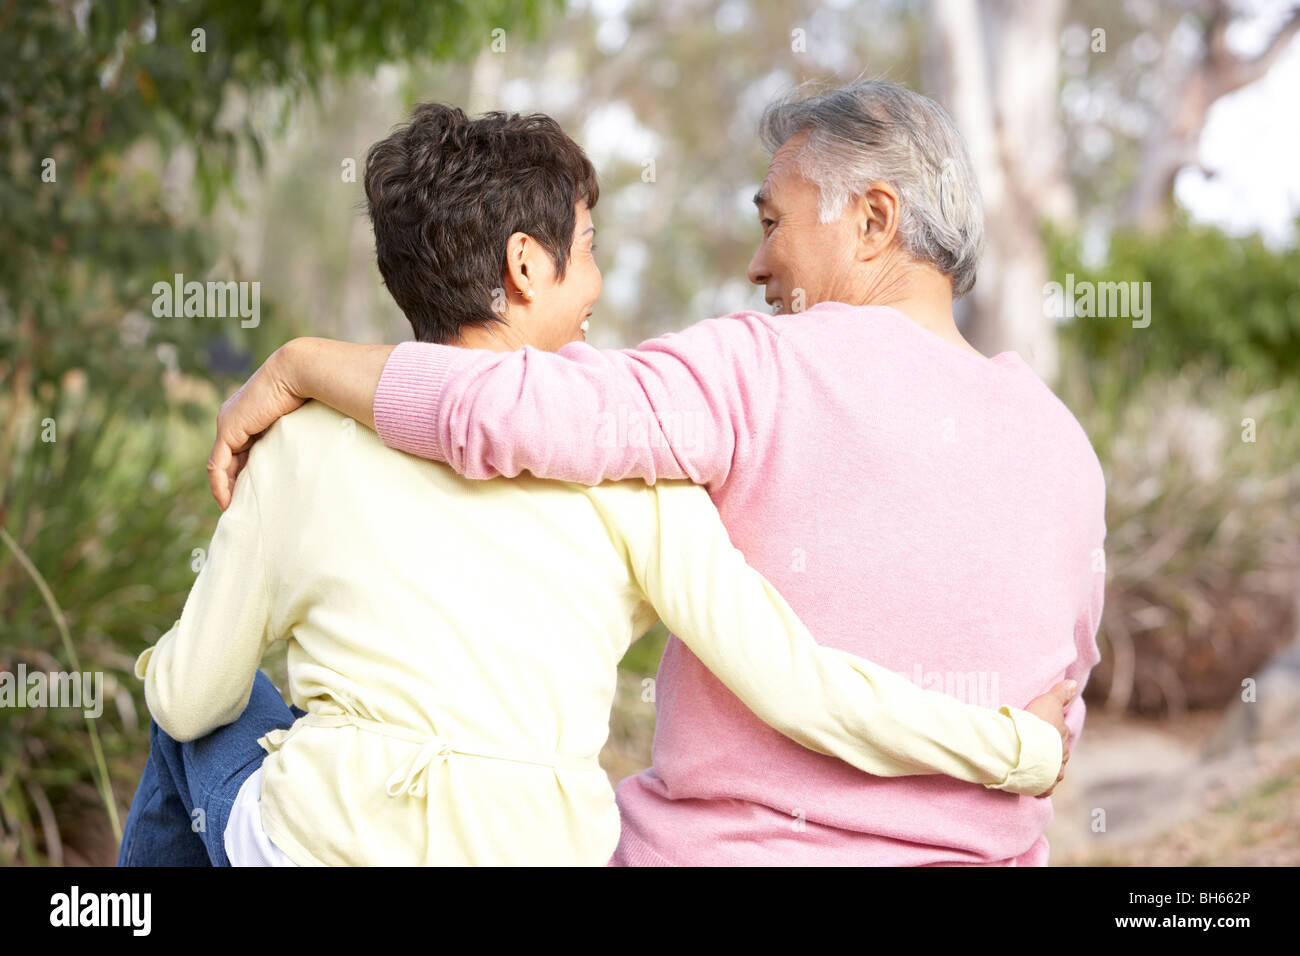 Back View Of Senior Couple In Park Stock Photo